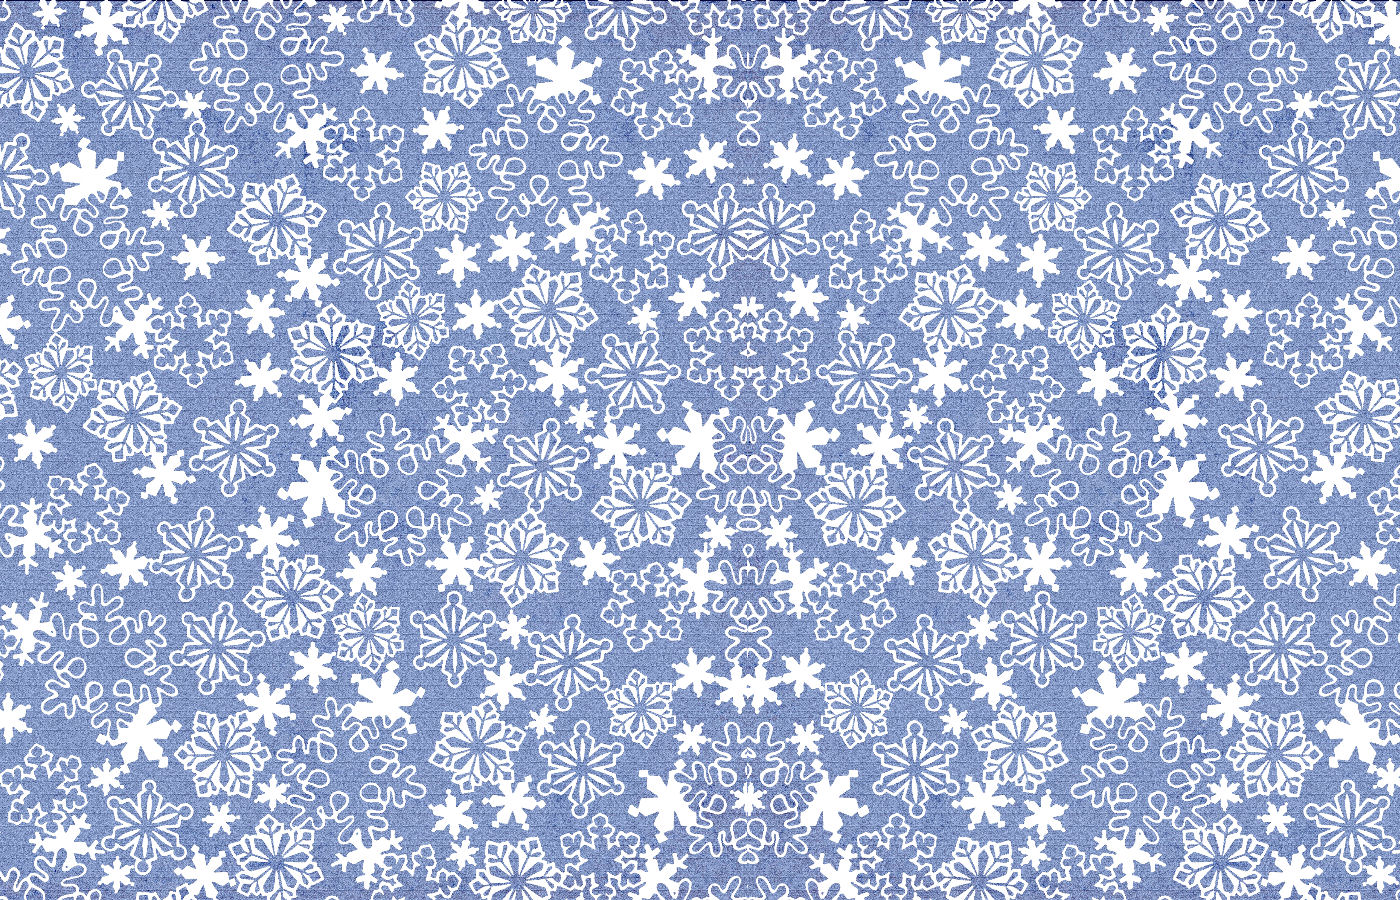 Magic Winter Snowflakes Blue Background Grungy